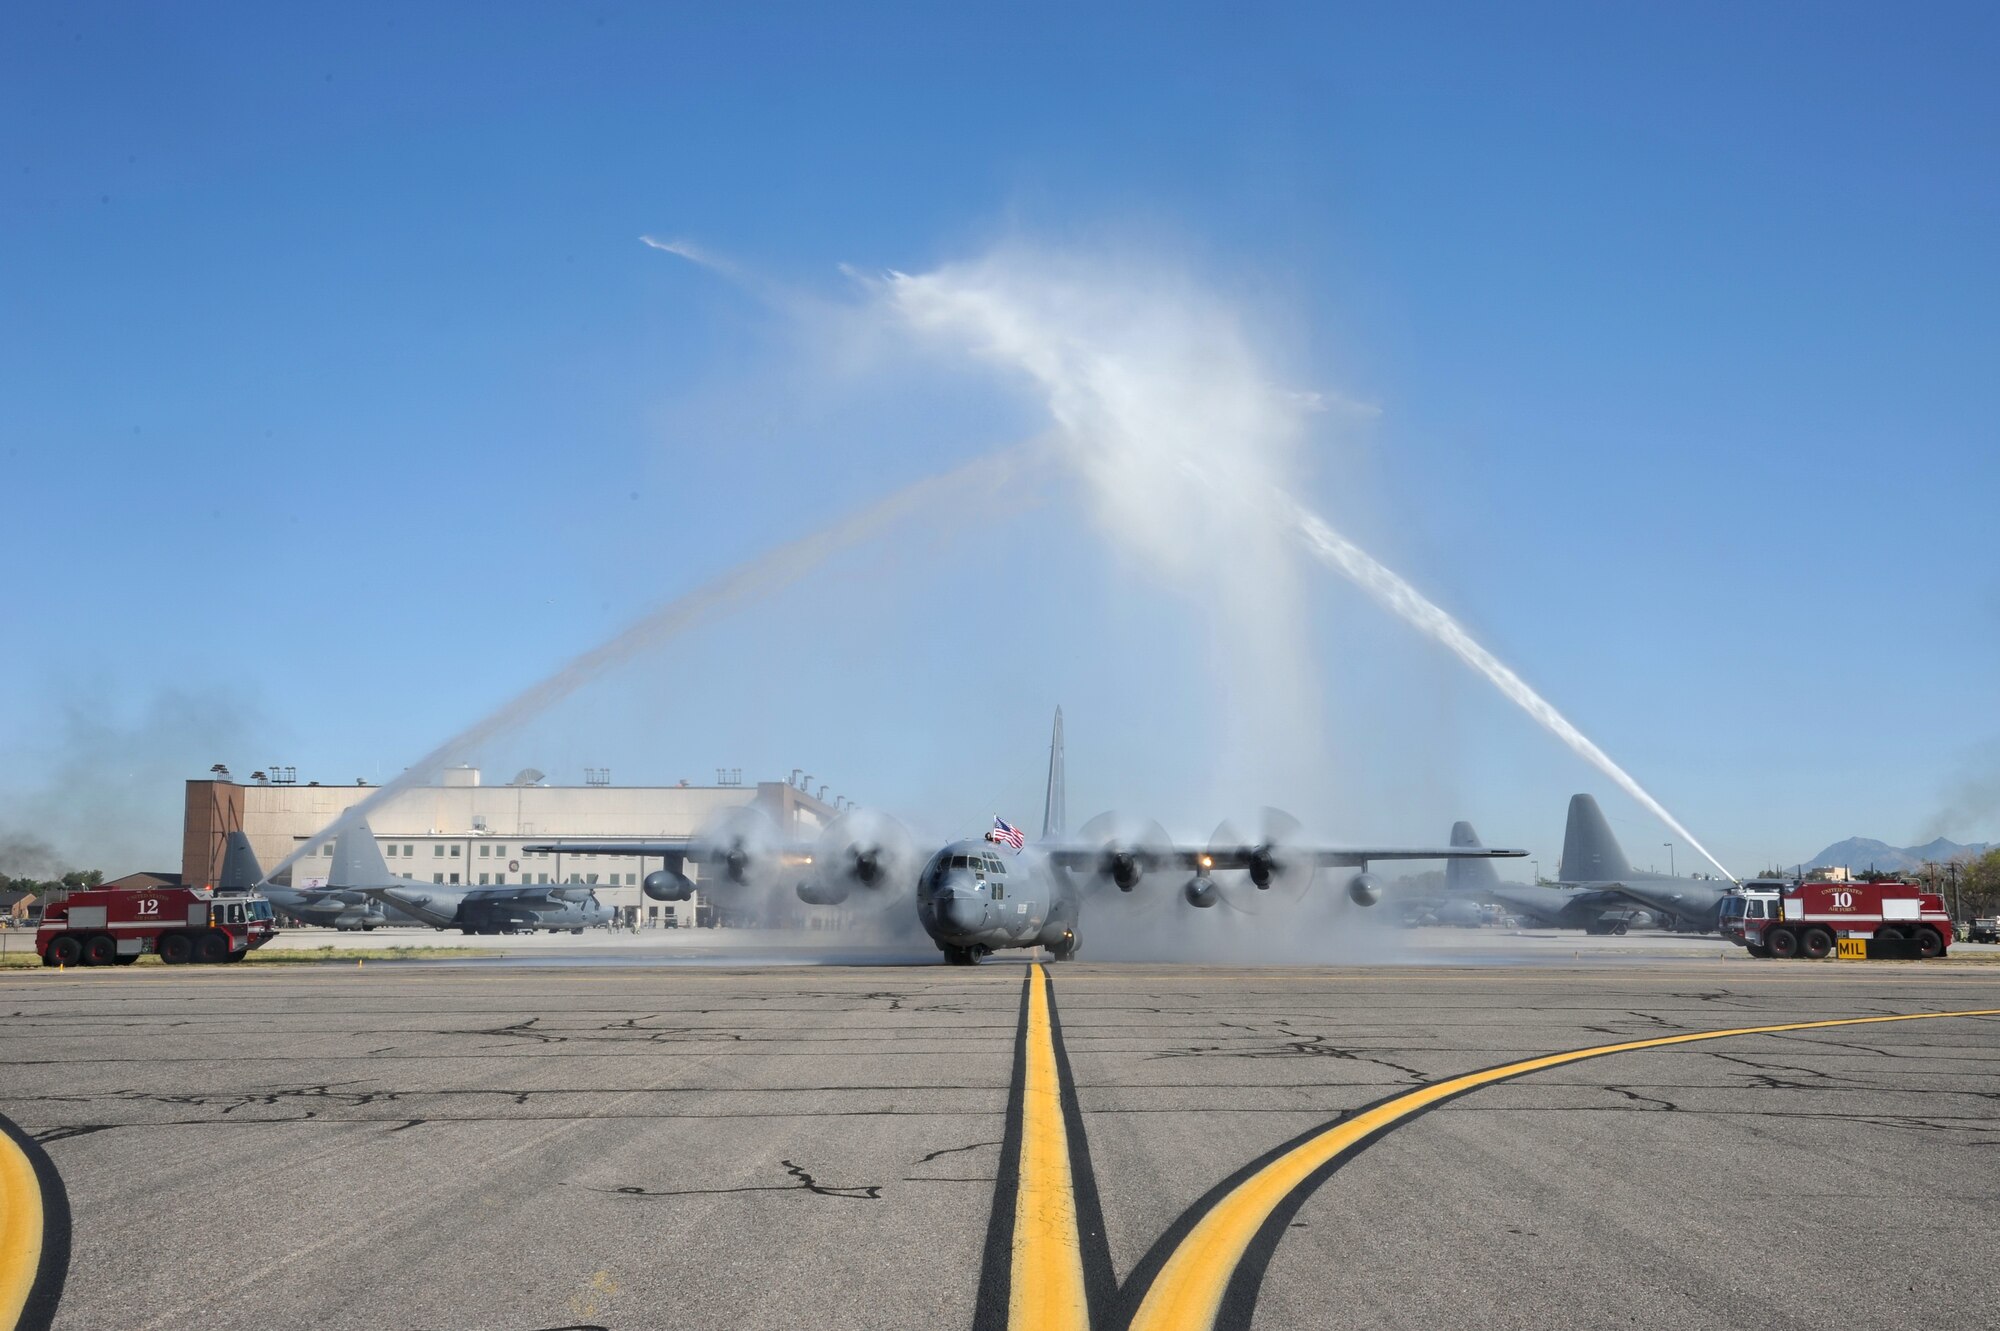 Firefighters give a water salute to one of the 550th Special Operations Squadron's last two remaining assigned MC-130Ps Combat Shadows as it taxis the runway in preparation for its final flight Sept. 6.  The departure of the aircraft marks the end of a 25-year training curriculum at Kirtland. (Photo by Ken Moore)